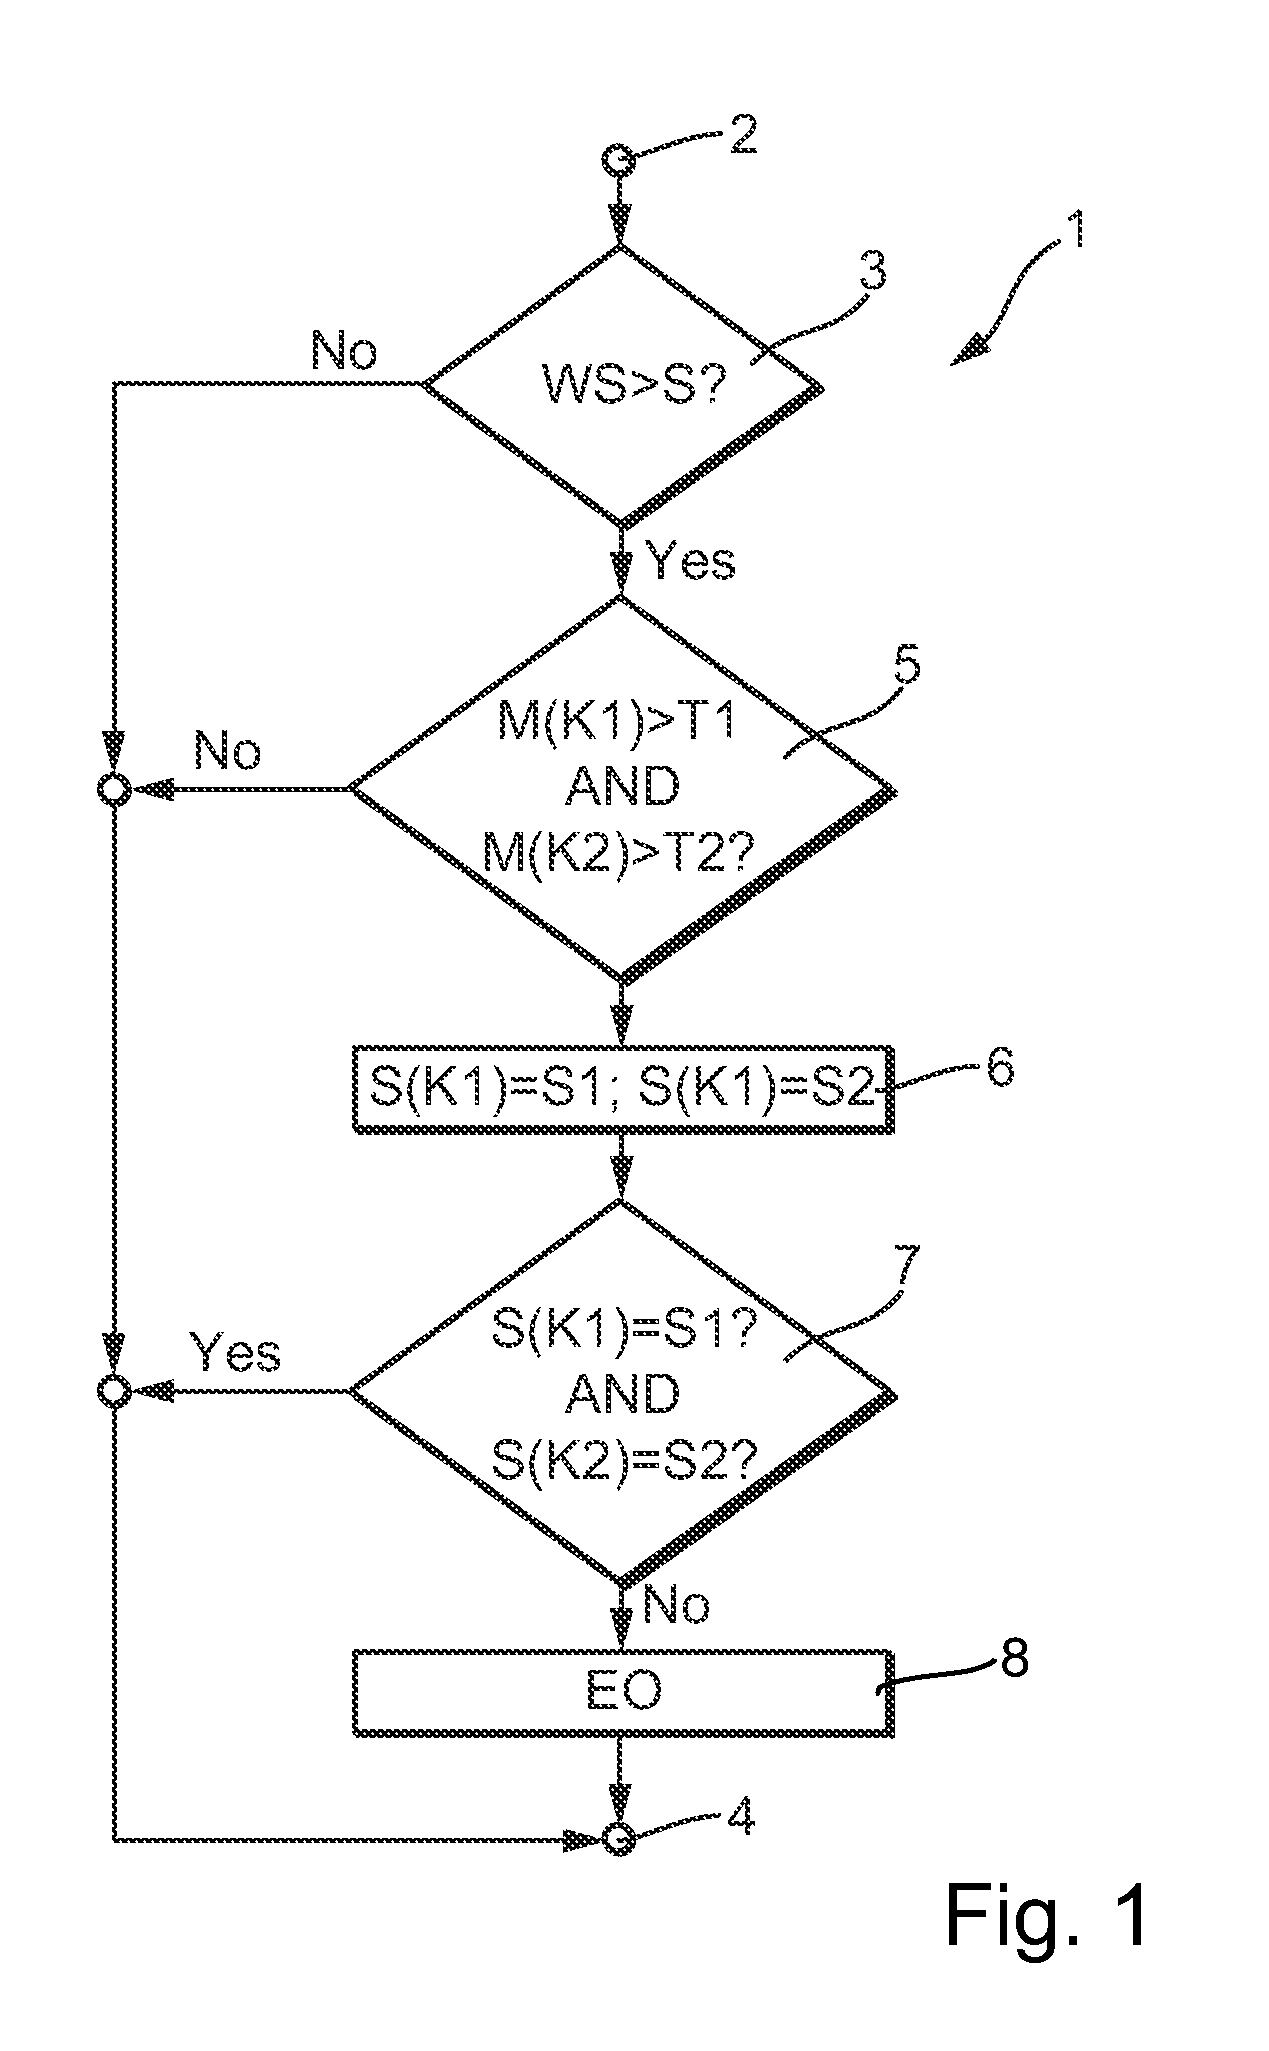 Method for controlling a dual clutch transmission during shift